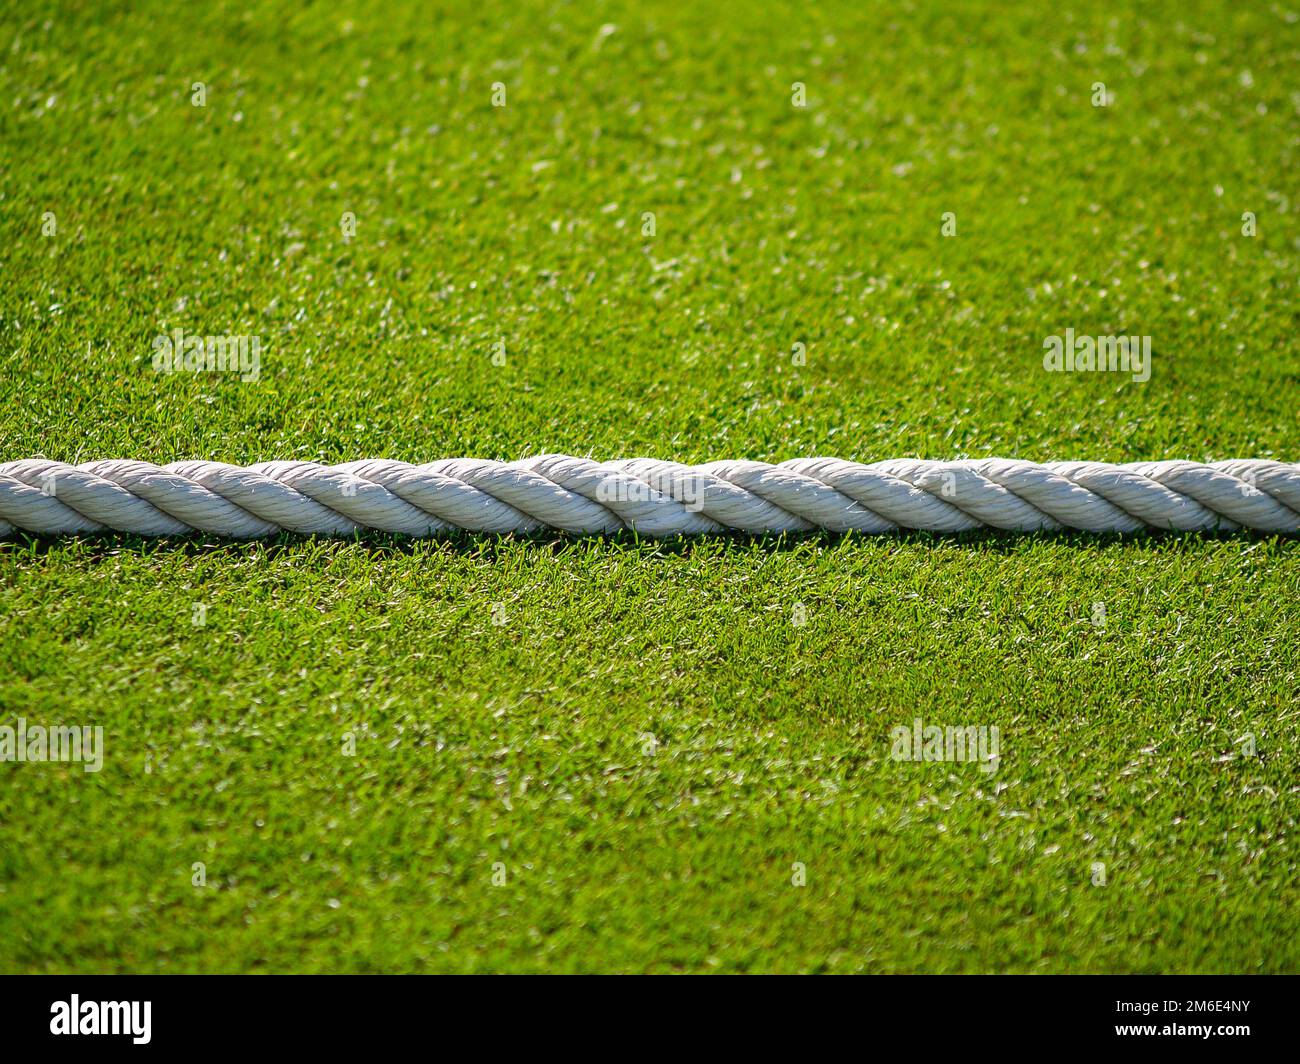 White rope divides green lawn as boundary rope on cricket pitch. Stock Photo